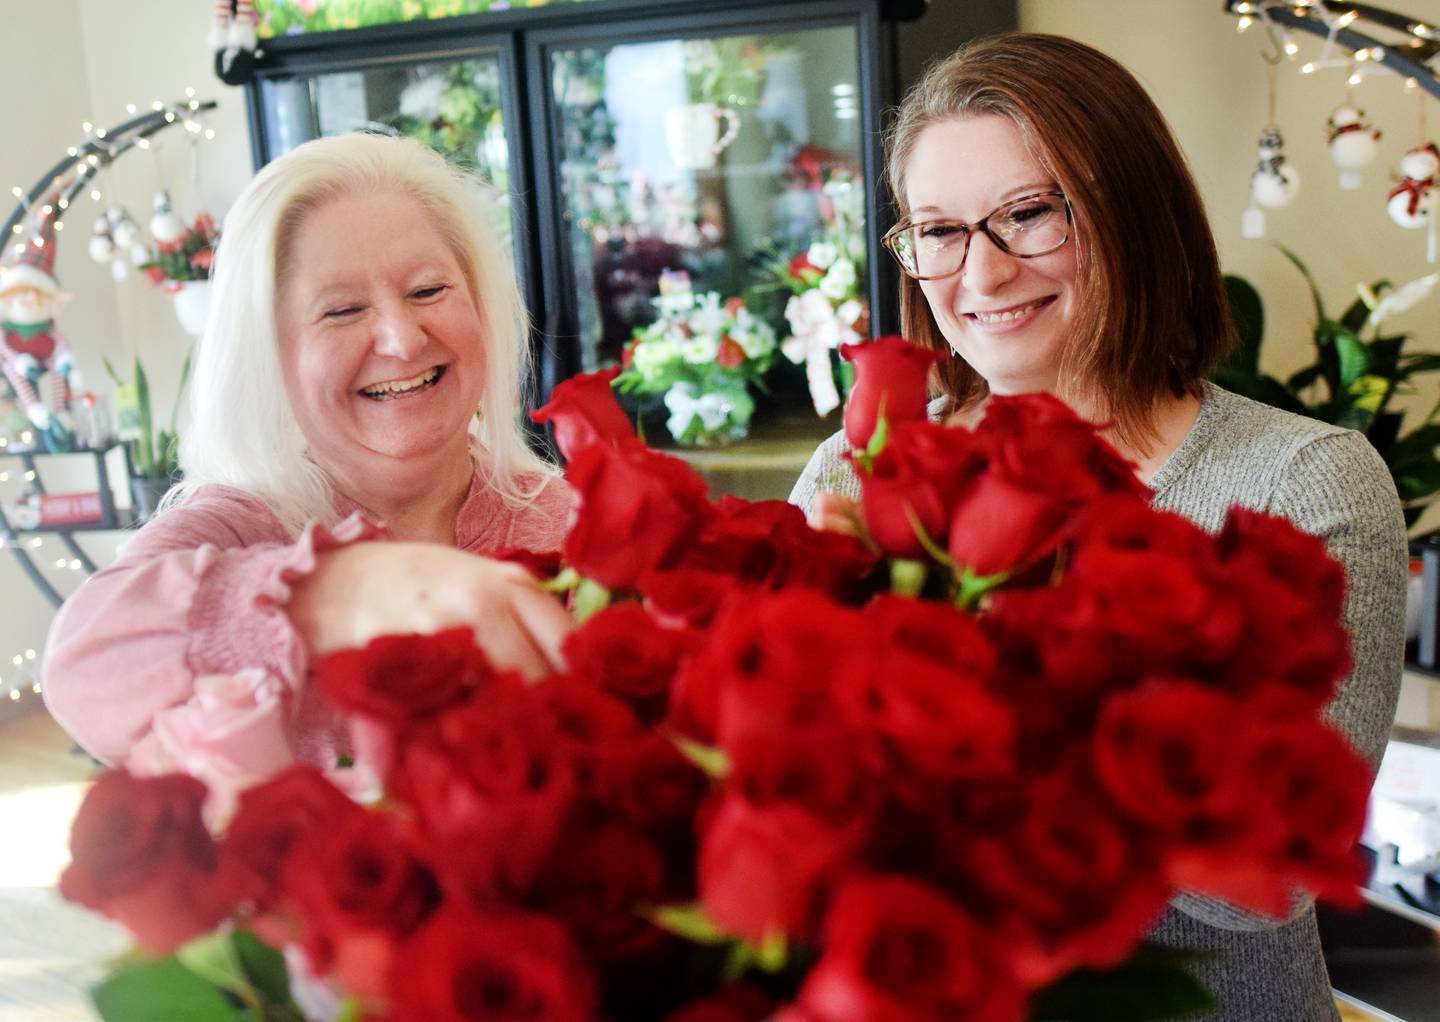 Jennifer Zimmerman, owner of Blooms by Design, and daughter Jerrica Pietz arrange roses for sale at the new flower shop, which opened this past week in Newton.